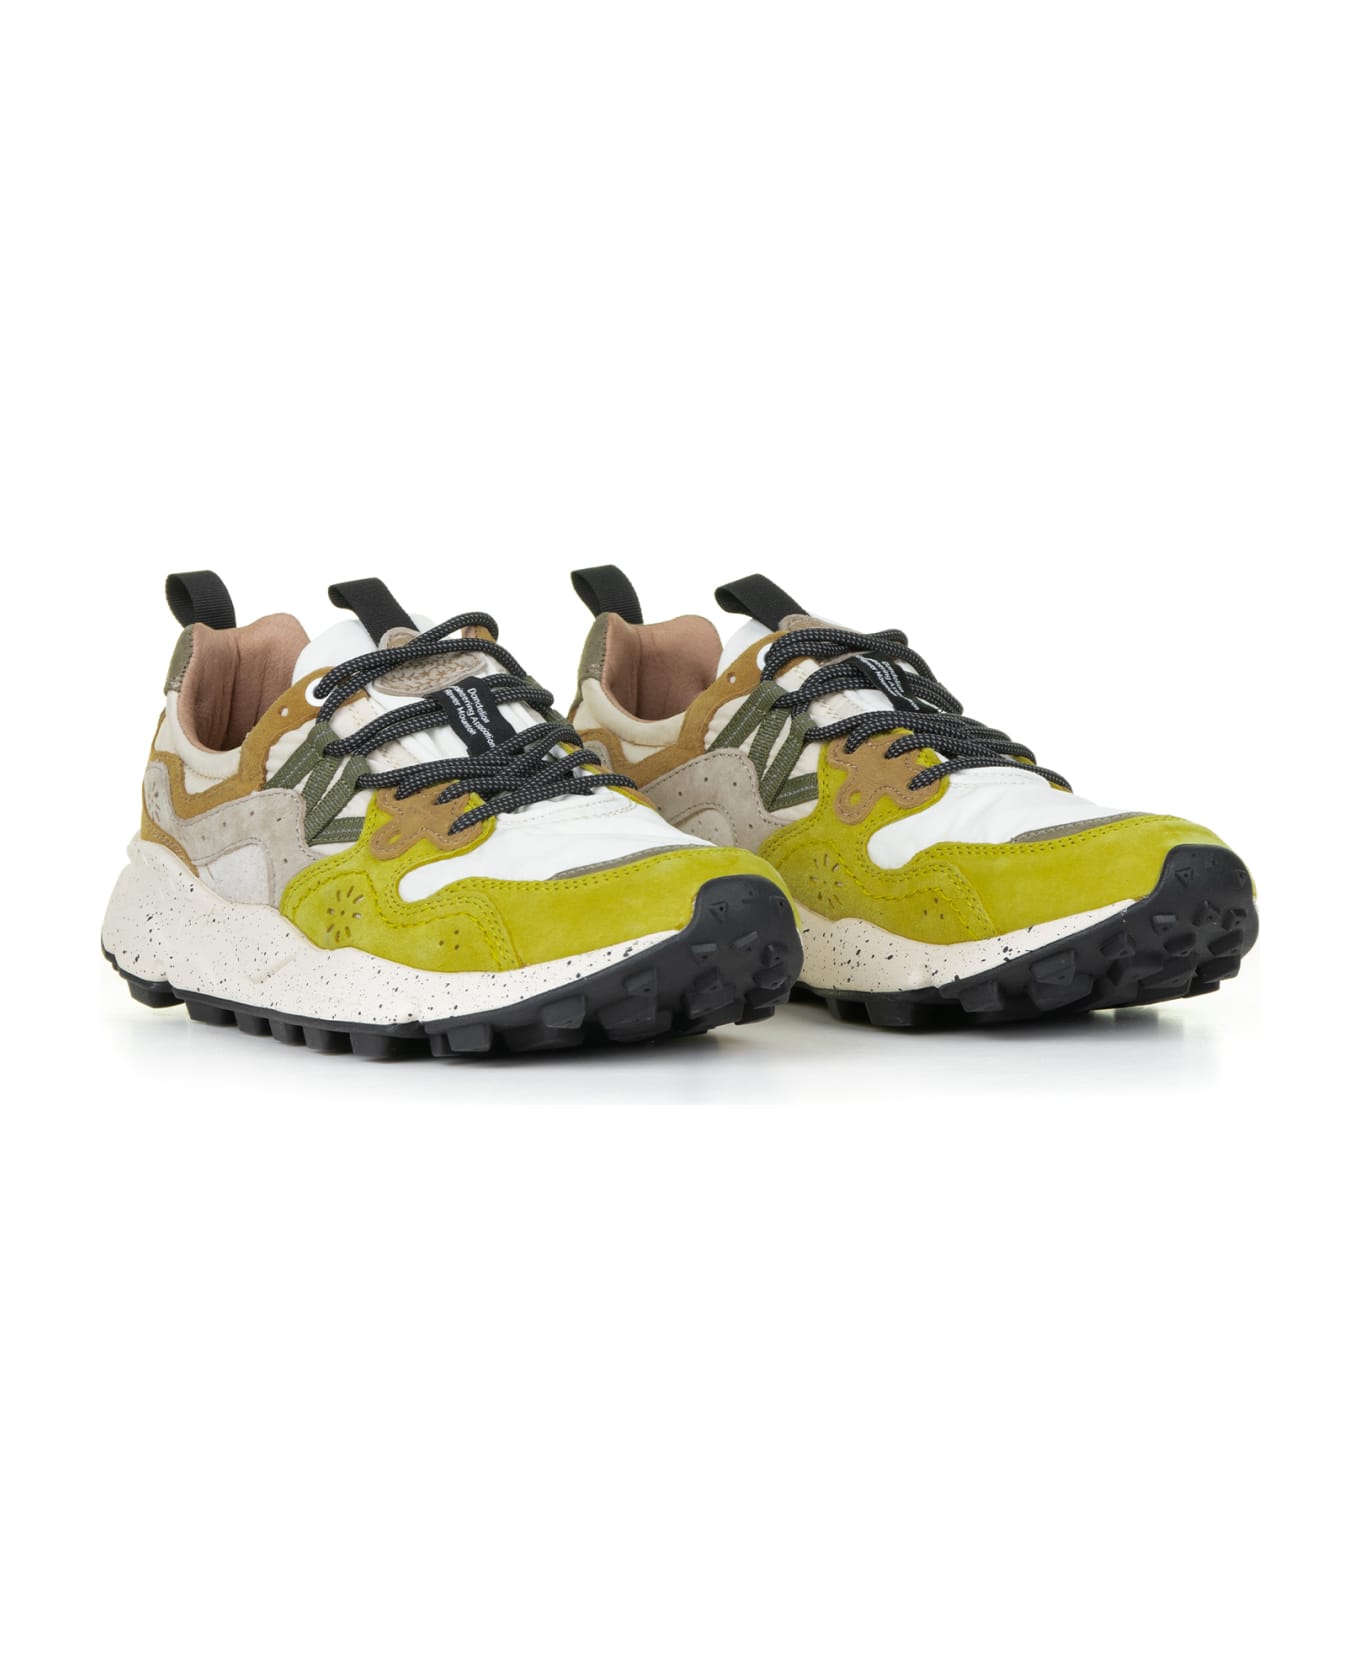 Flower Mountain Yamano Orca Sneakers In Suede And Nylon - OCHER WHITE スニーカー